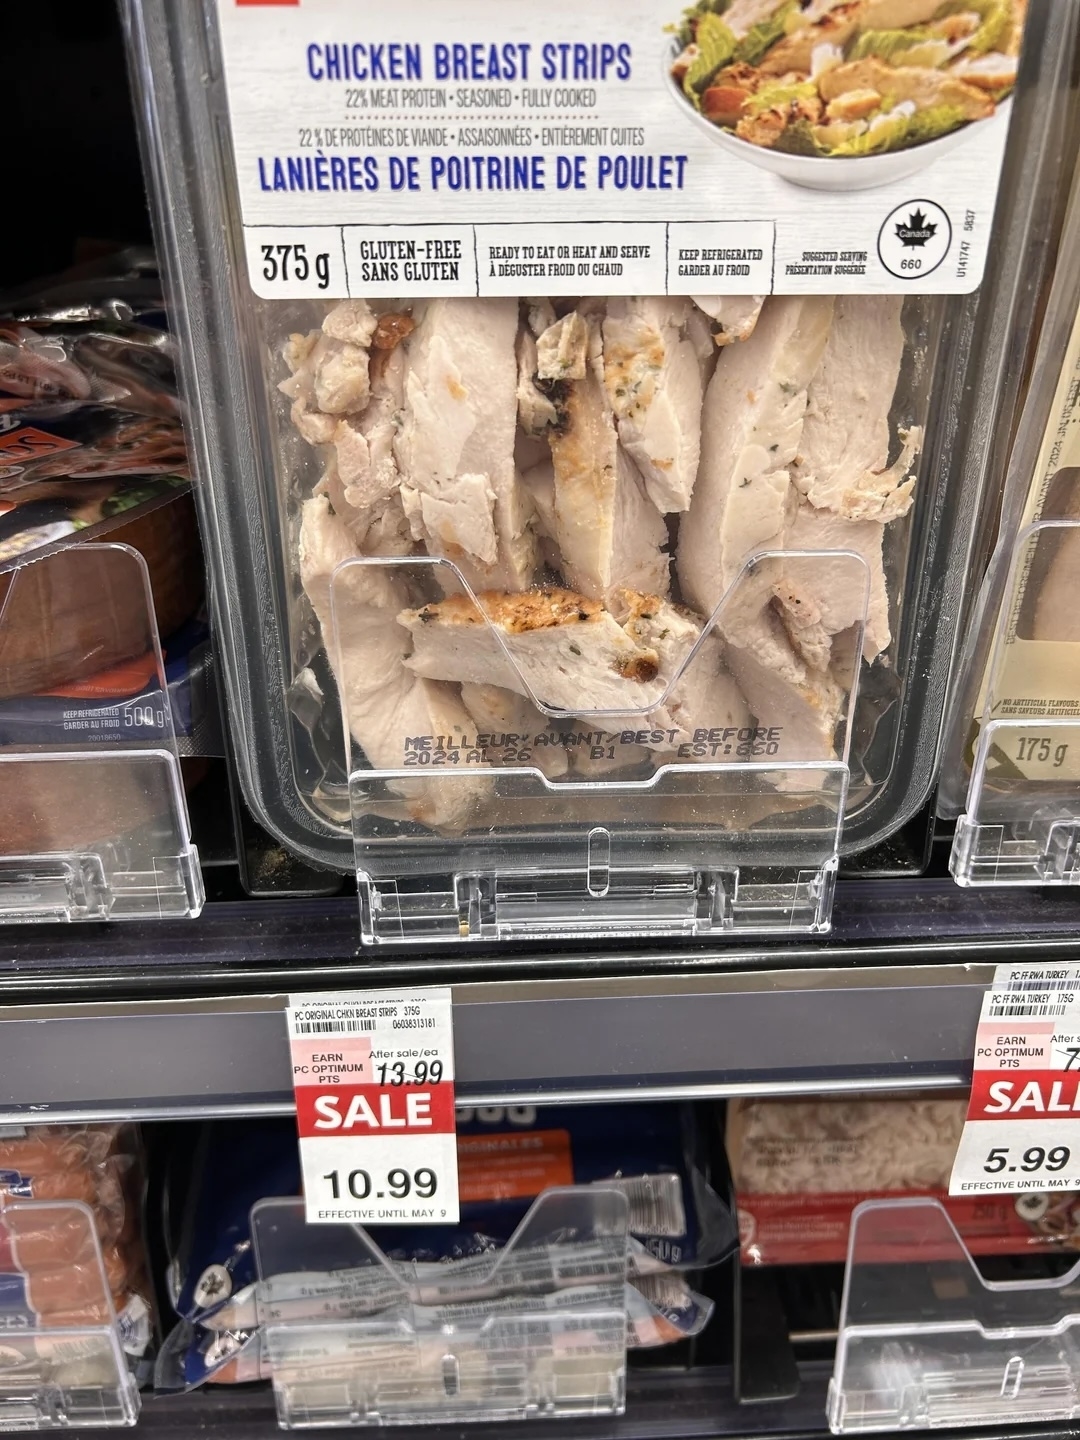 Package of gluten-free chicken breast strips on a supermarket shelf, regular price and sale price displayed